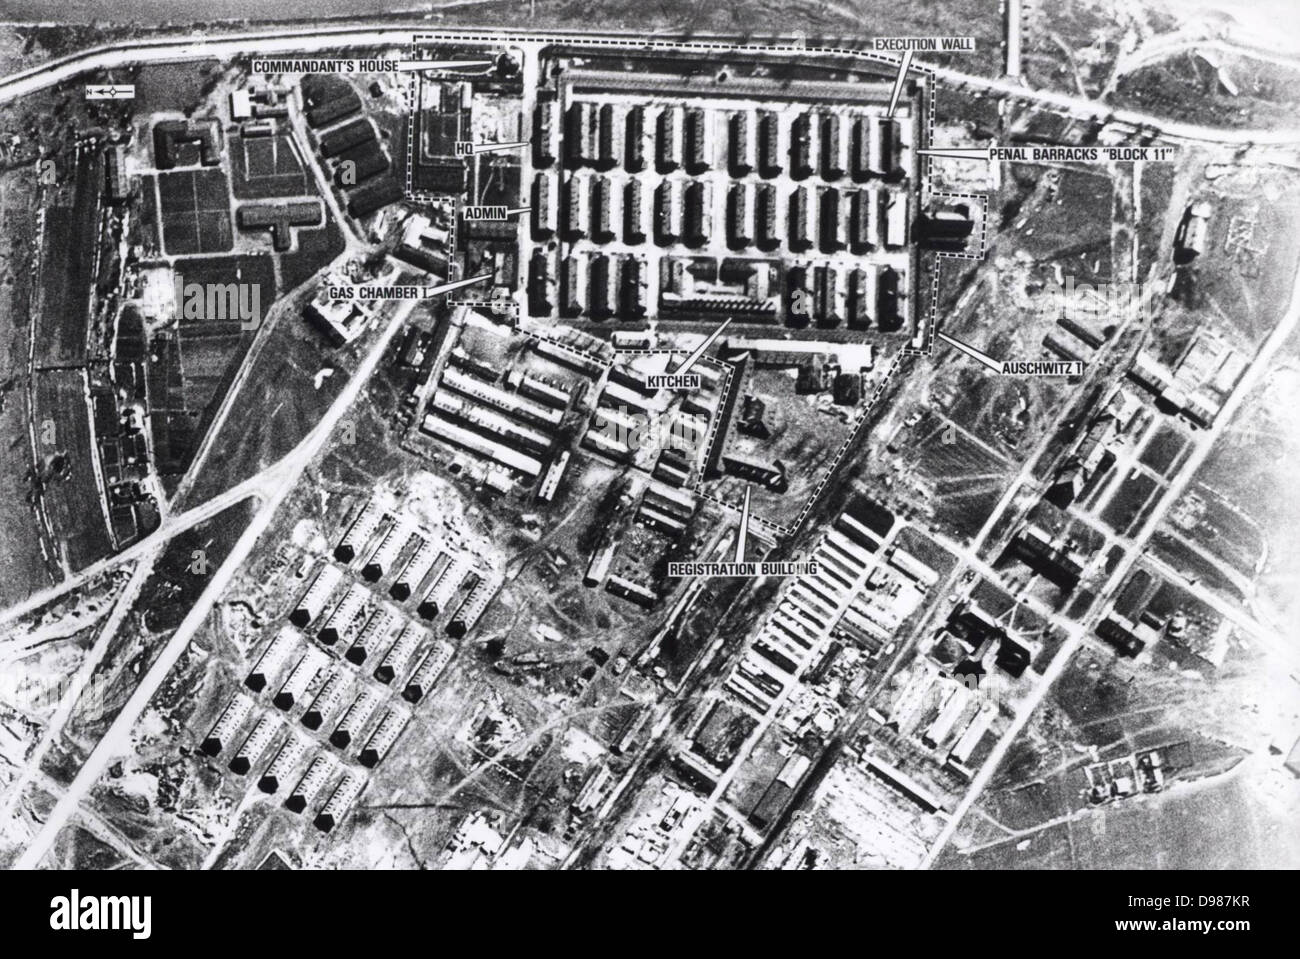 Aerial view of Auschwitz I concentration camp, 4 April 1944. Auschwitz-Birkenau, Poland, was the largest of the German Nazi concentration and extermination camps during the Second World War. Stock Photo